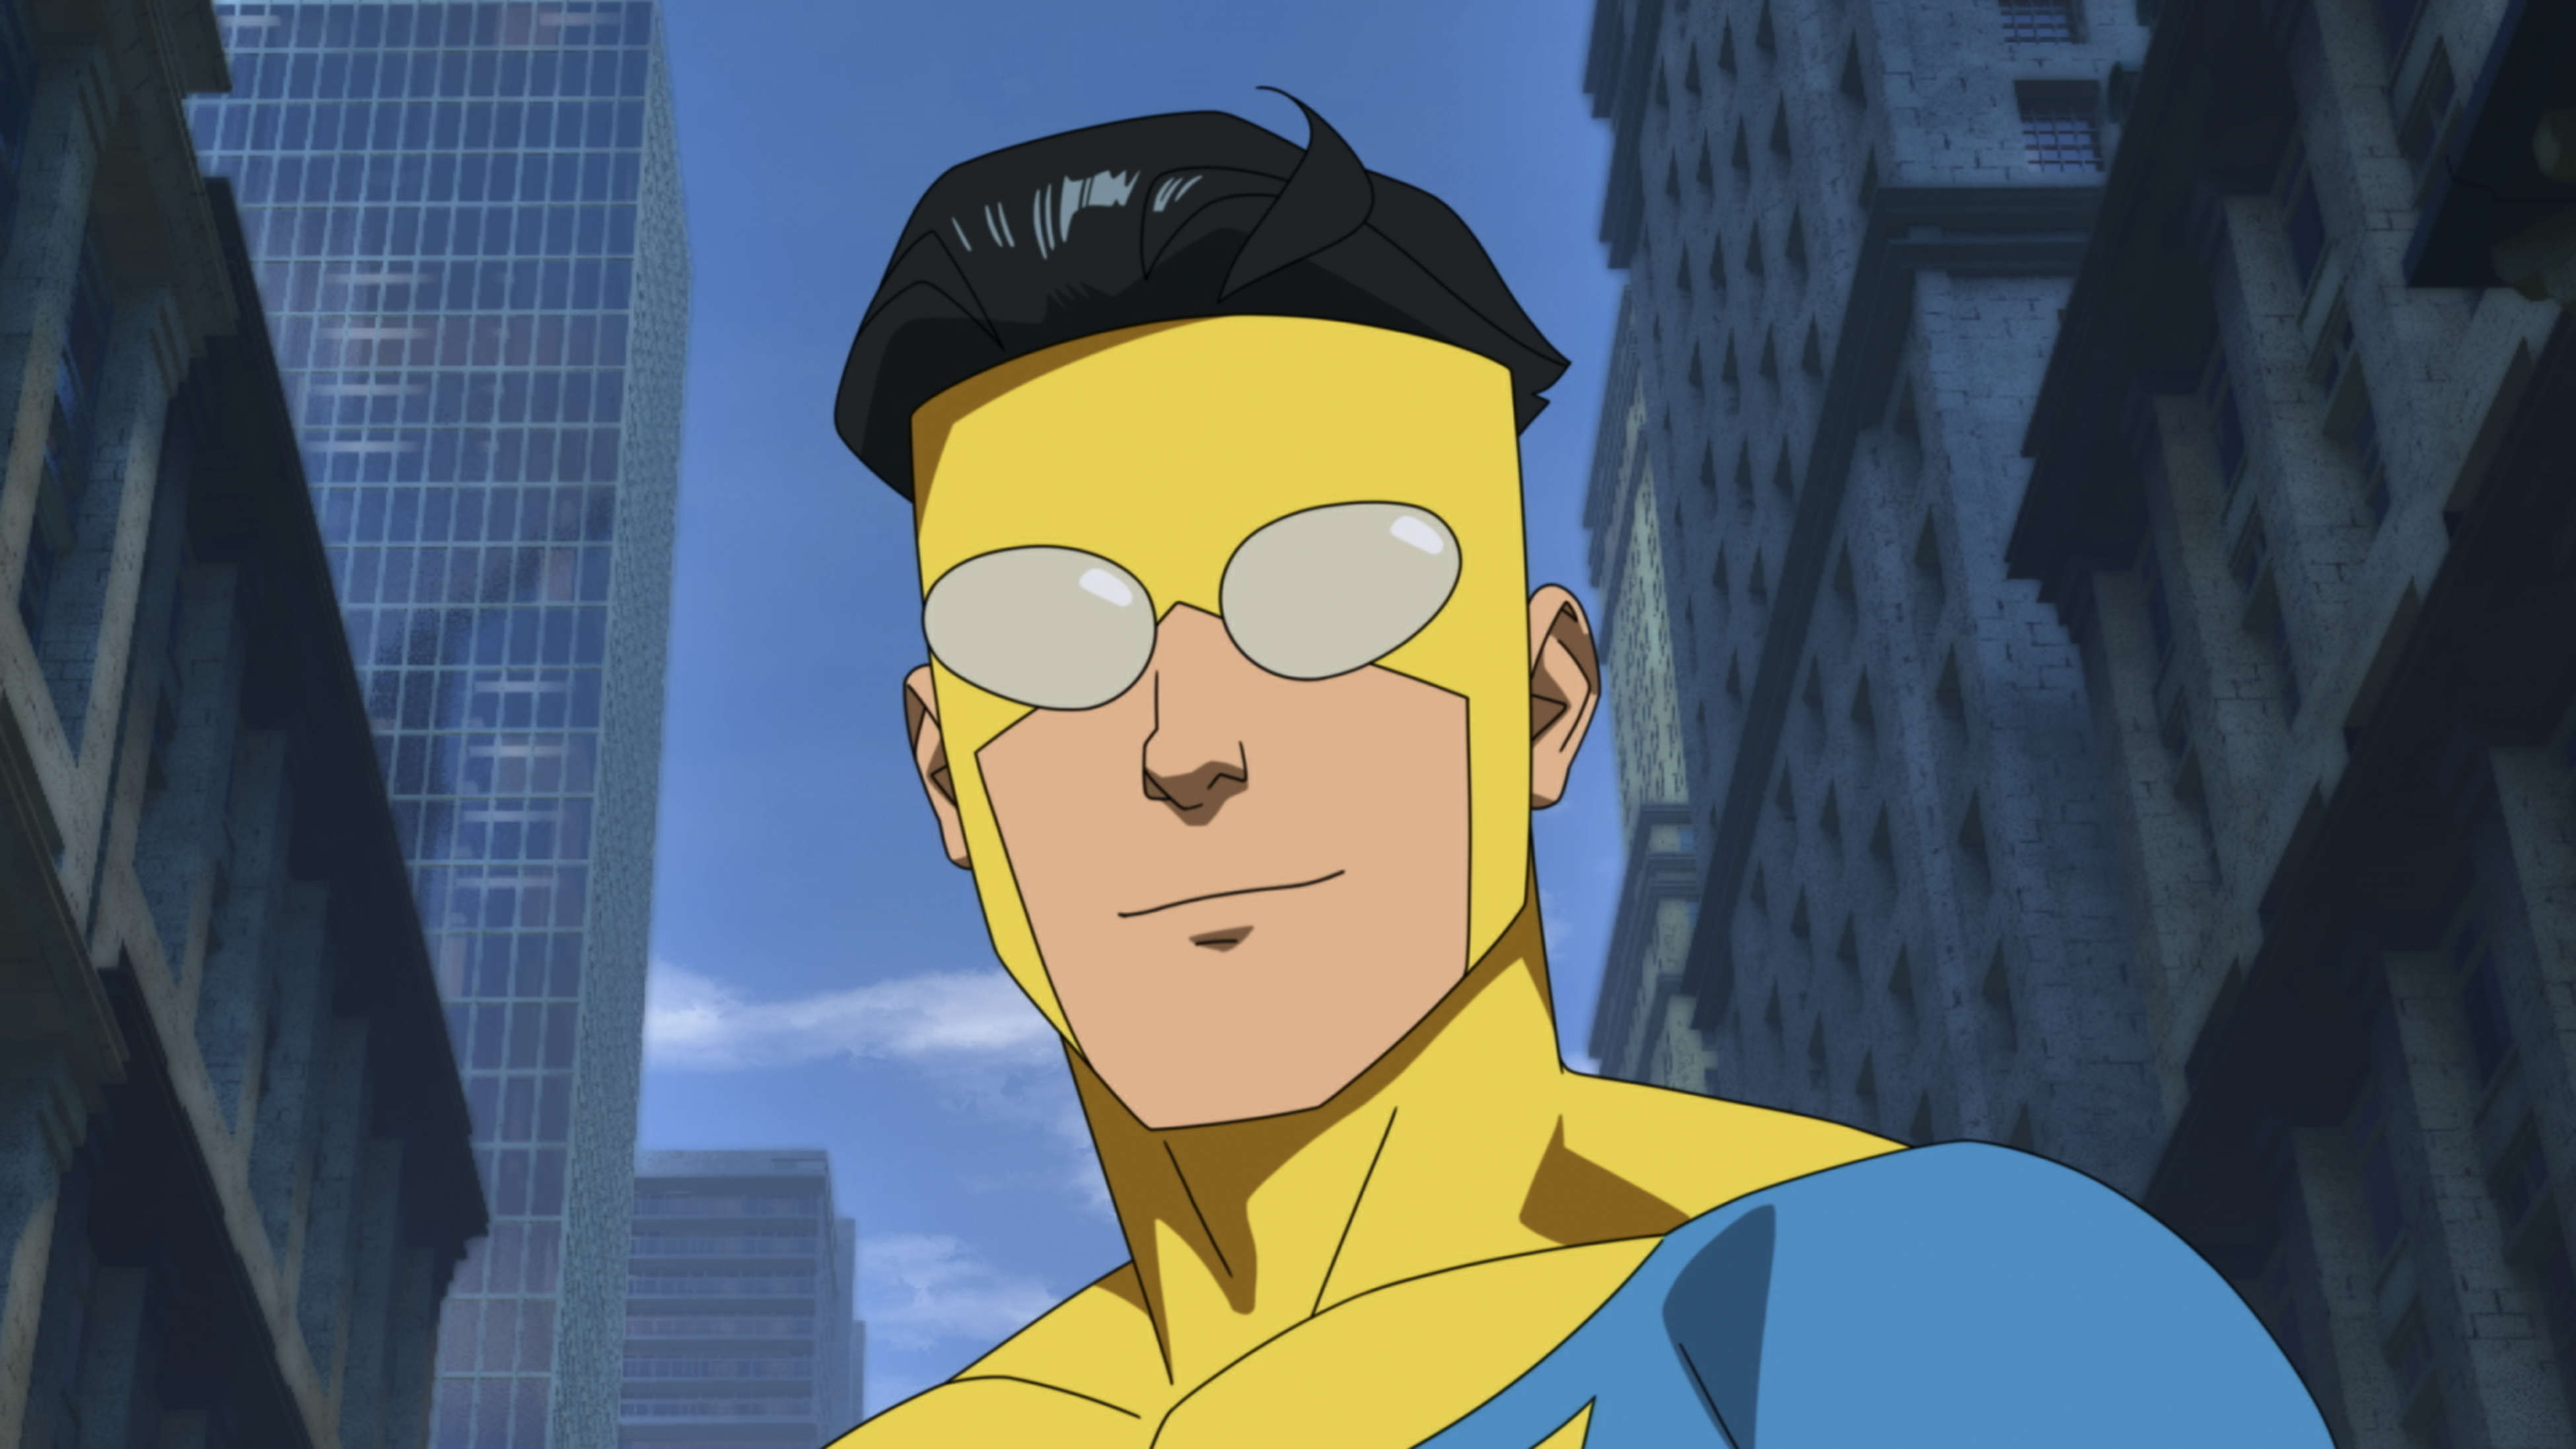 Invincible Animated Series: First Look at Character Designs From